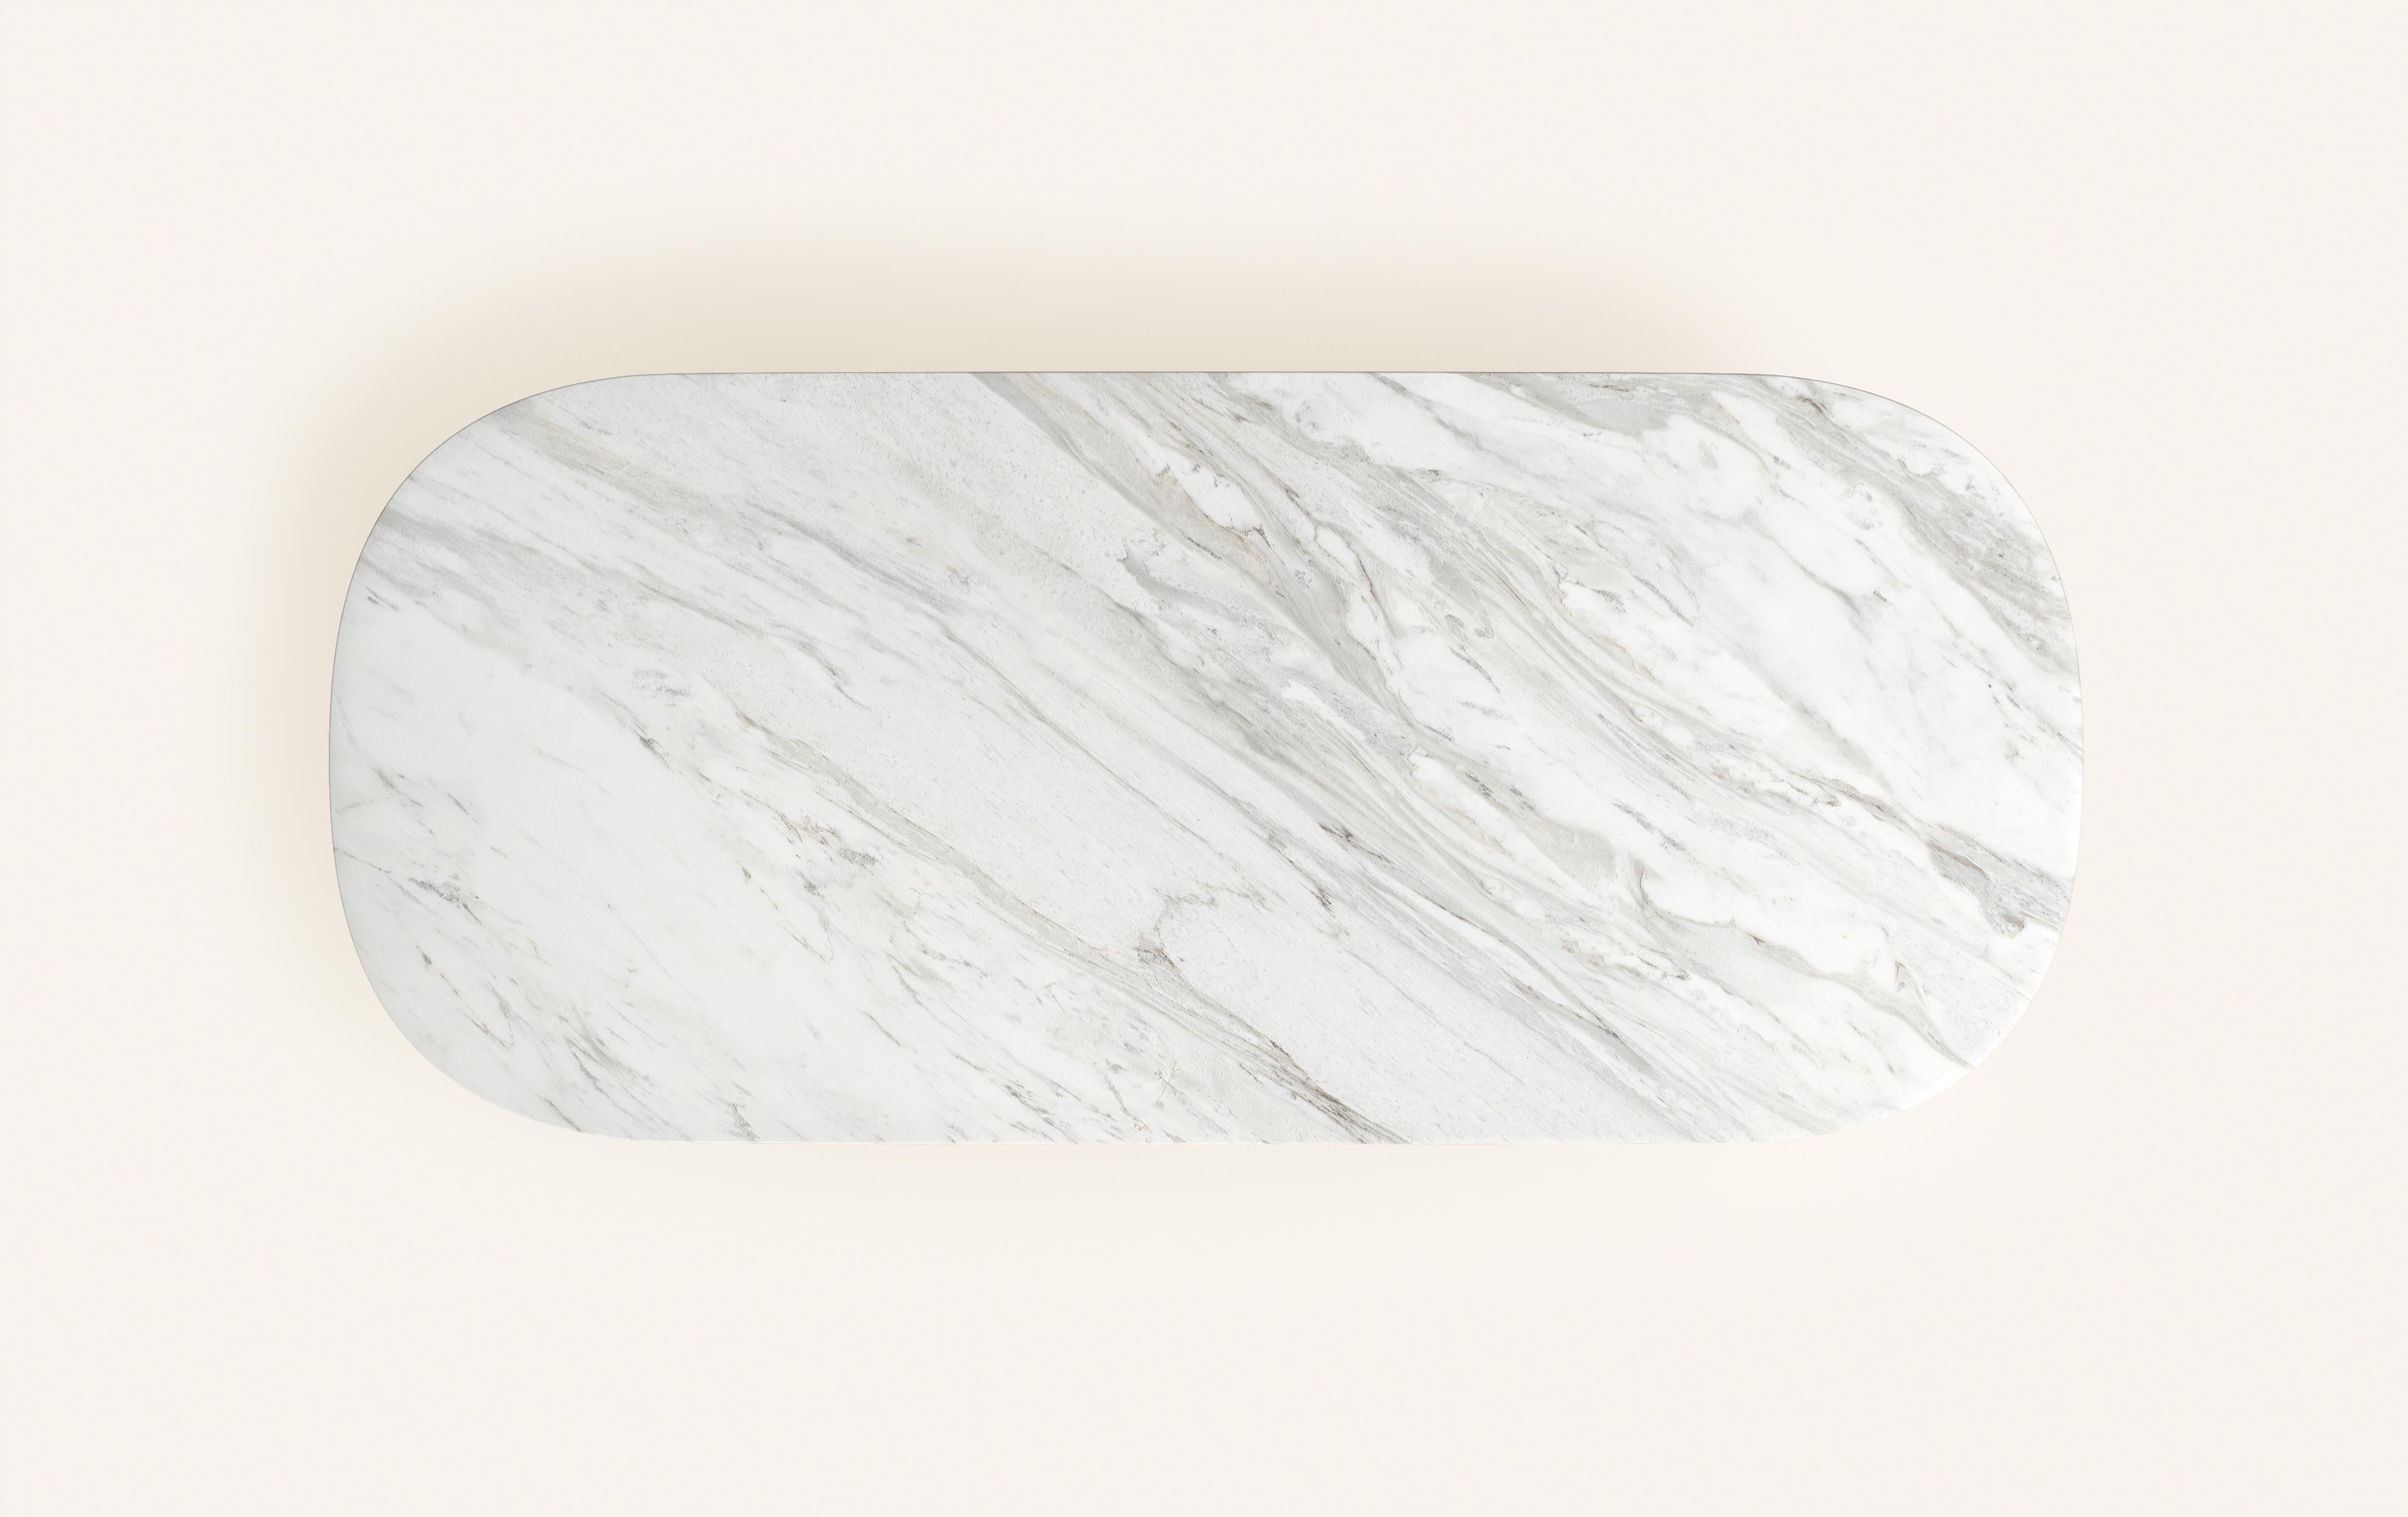 FORM(LA) Cono Oval Dining Table 84”L x 42”W x 30”H Volakas White Marble In New Condition For Sale In Los Angeles, CA